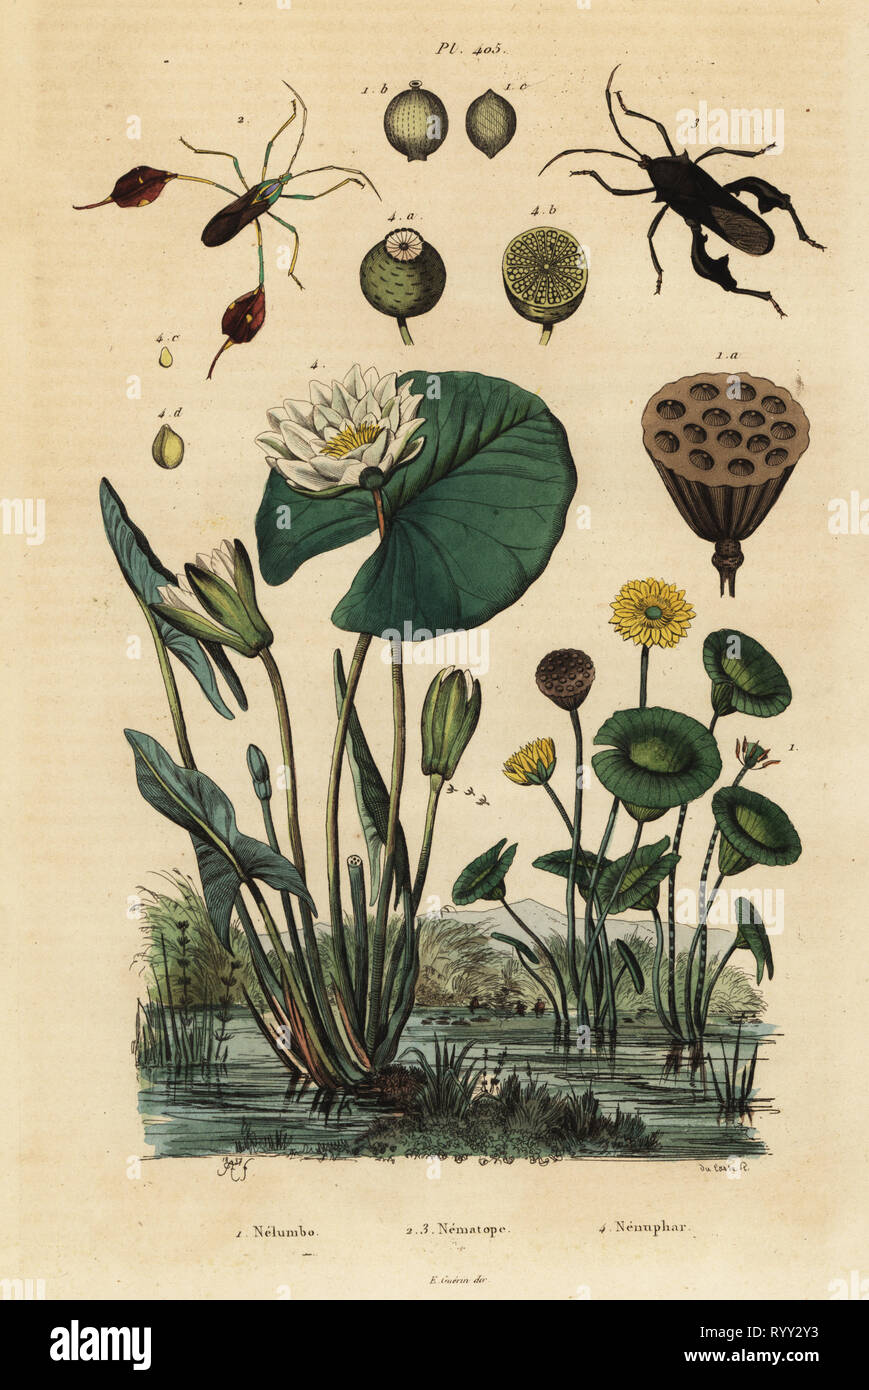 Yellow lotus, Nelumbo lutea 1, leaf-footed bugs, Anisoscelis foliaceus 2 and Anoplocnemis curvipes 3, and white water lily, Nymphaea alba 4. Nelumbo, Nematope, Nenuphar. Handcoloured steel engraving by du Casse after an illustration by Adolph Fries from Felix-Edouard Guerin-Meneville's Dictionnaire Pittoresque d'Histoire Naturelle (Picturesque Dictionary of Natural History), Paris, 1834-39. Stock Photo